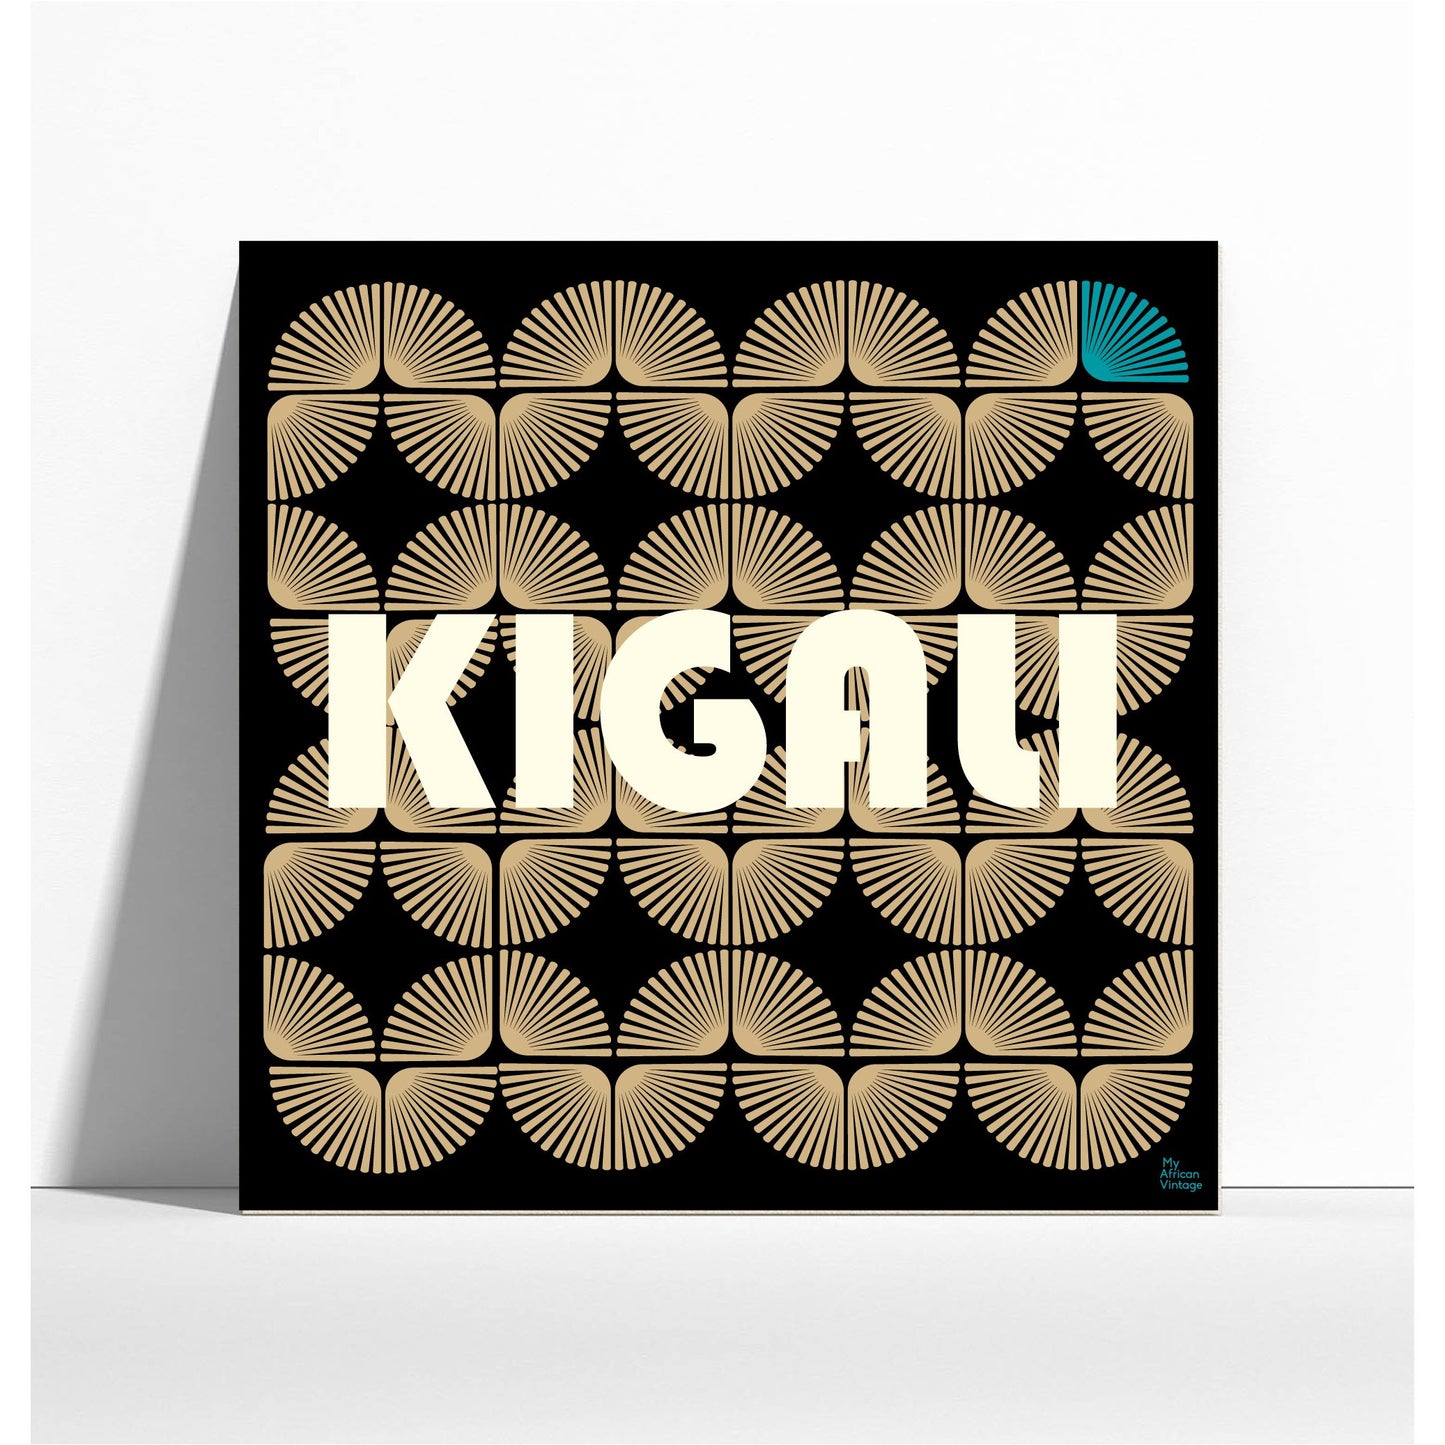 Affiche style rétro "Kigali" - collection "My African Vintage"